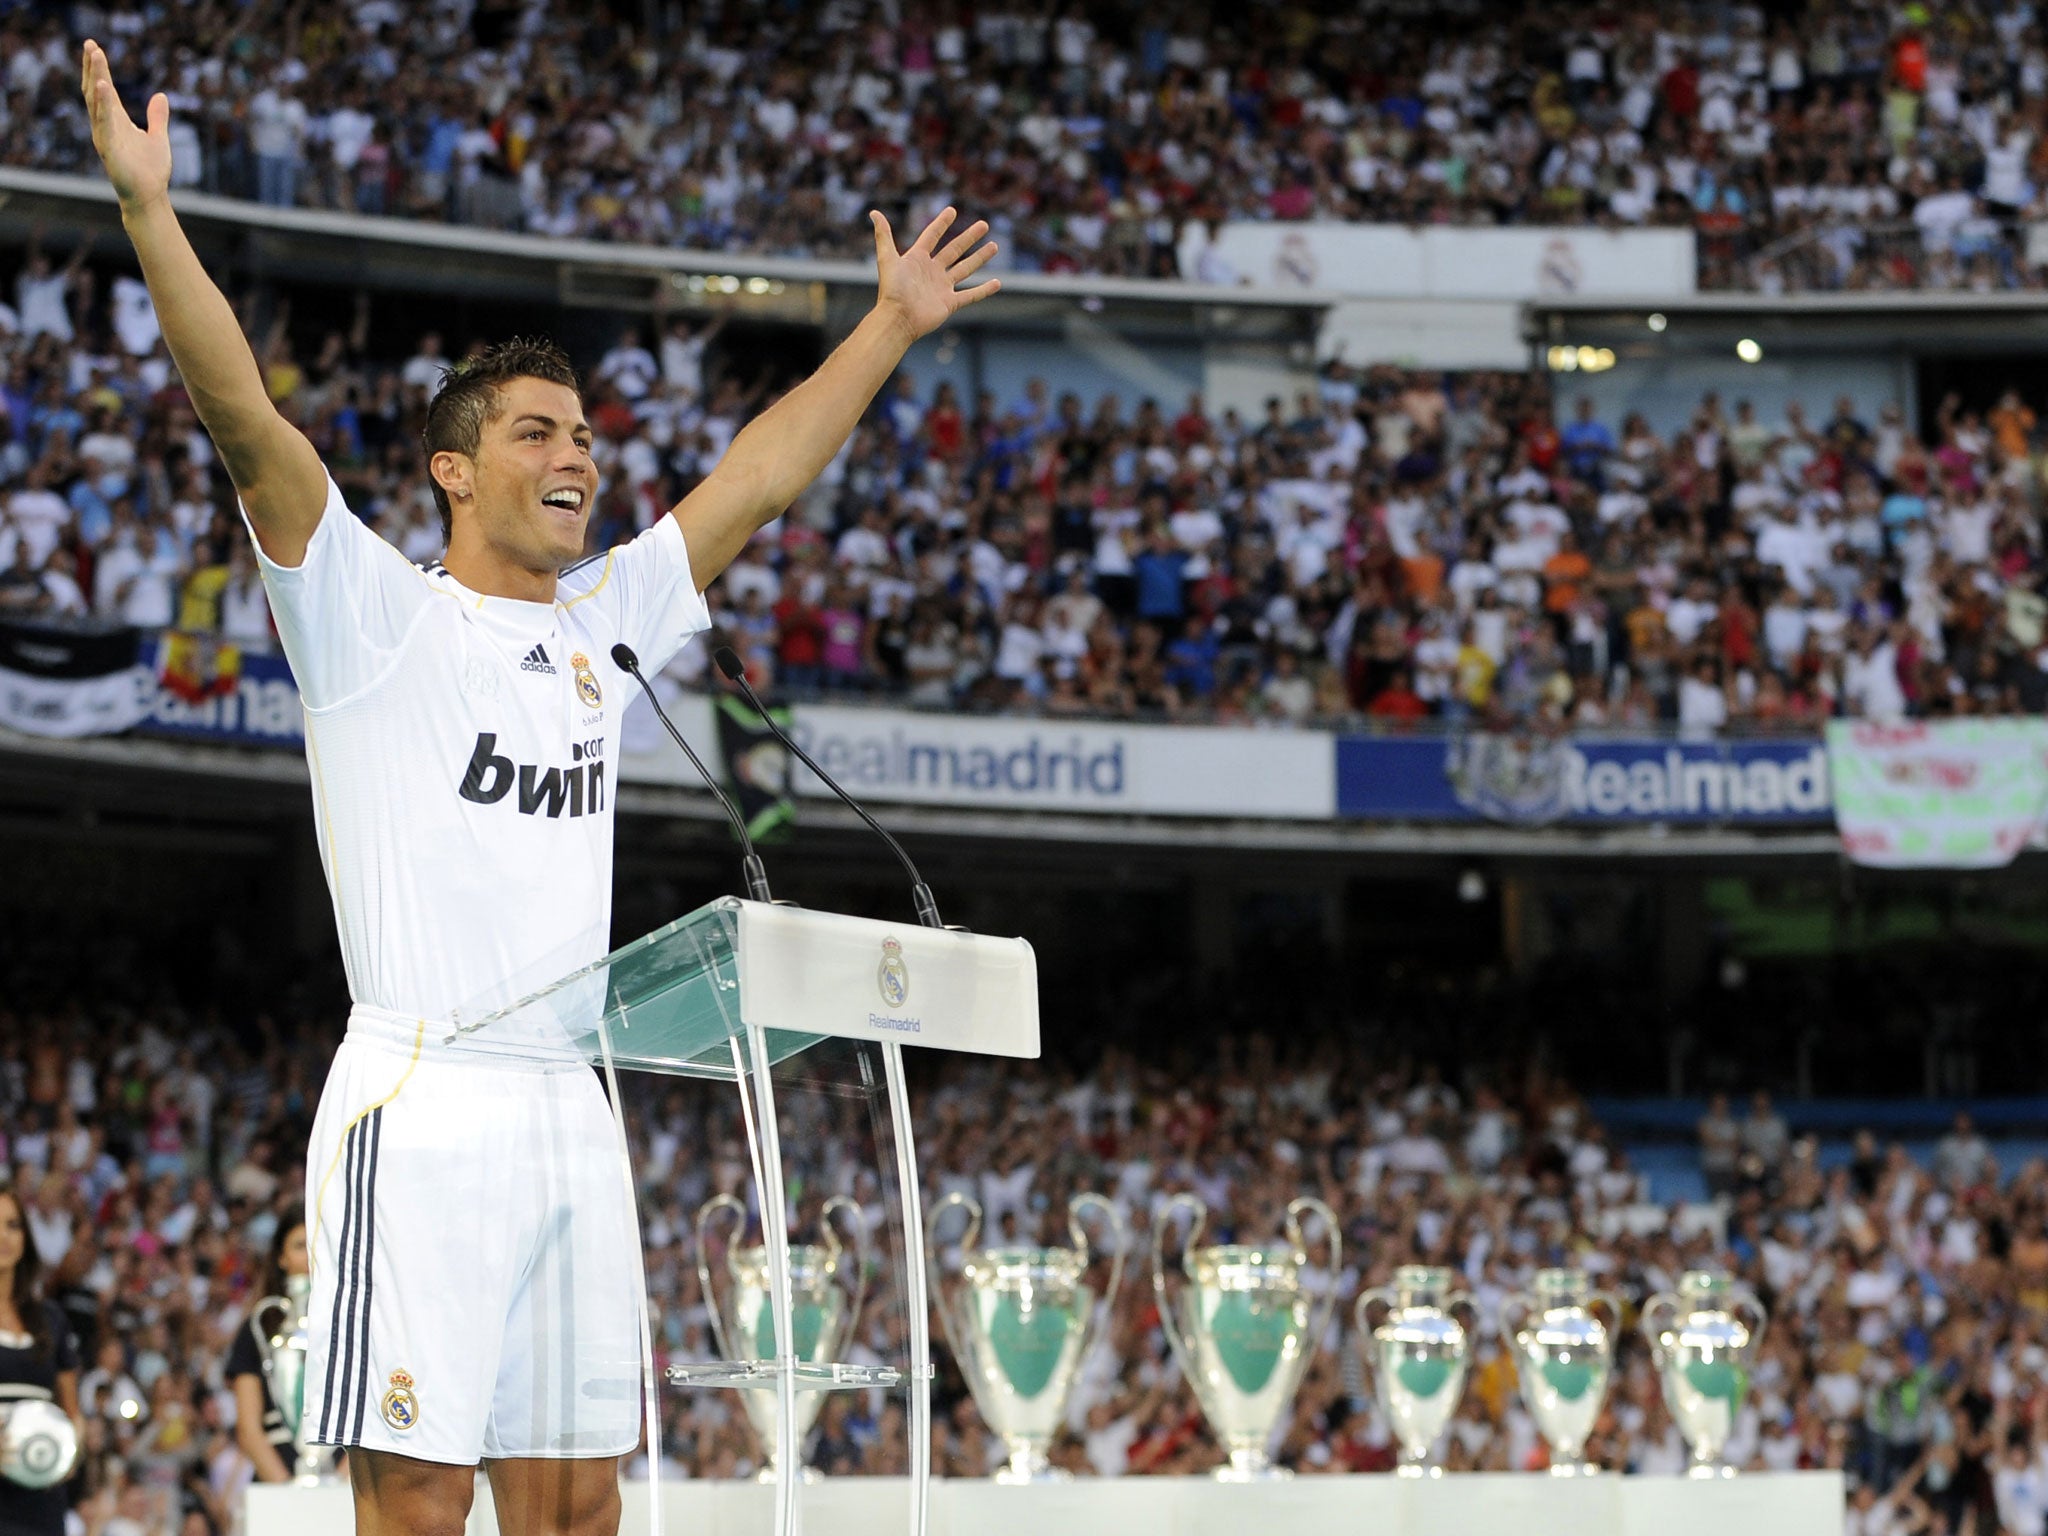 A record 80,000 Real Madrid fans turned out for Cristiano Ronaldo's unveiling at the Santiago Bernabeu after Real Madrid's resilient pursuit of the forward